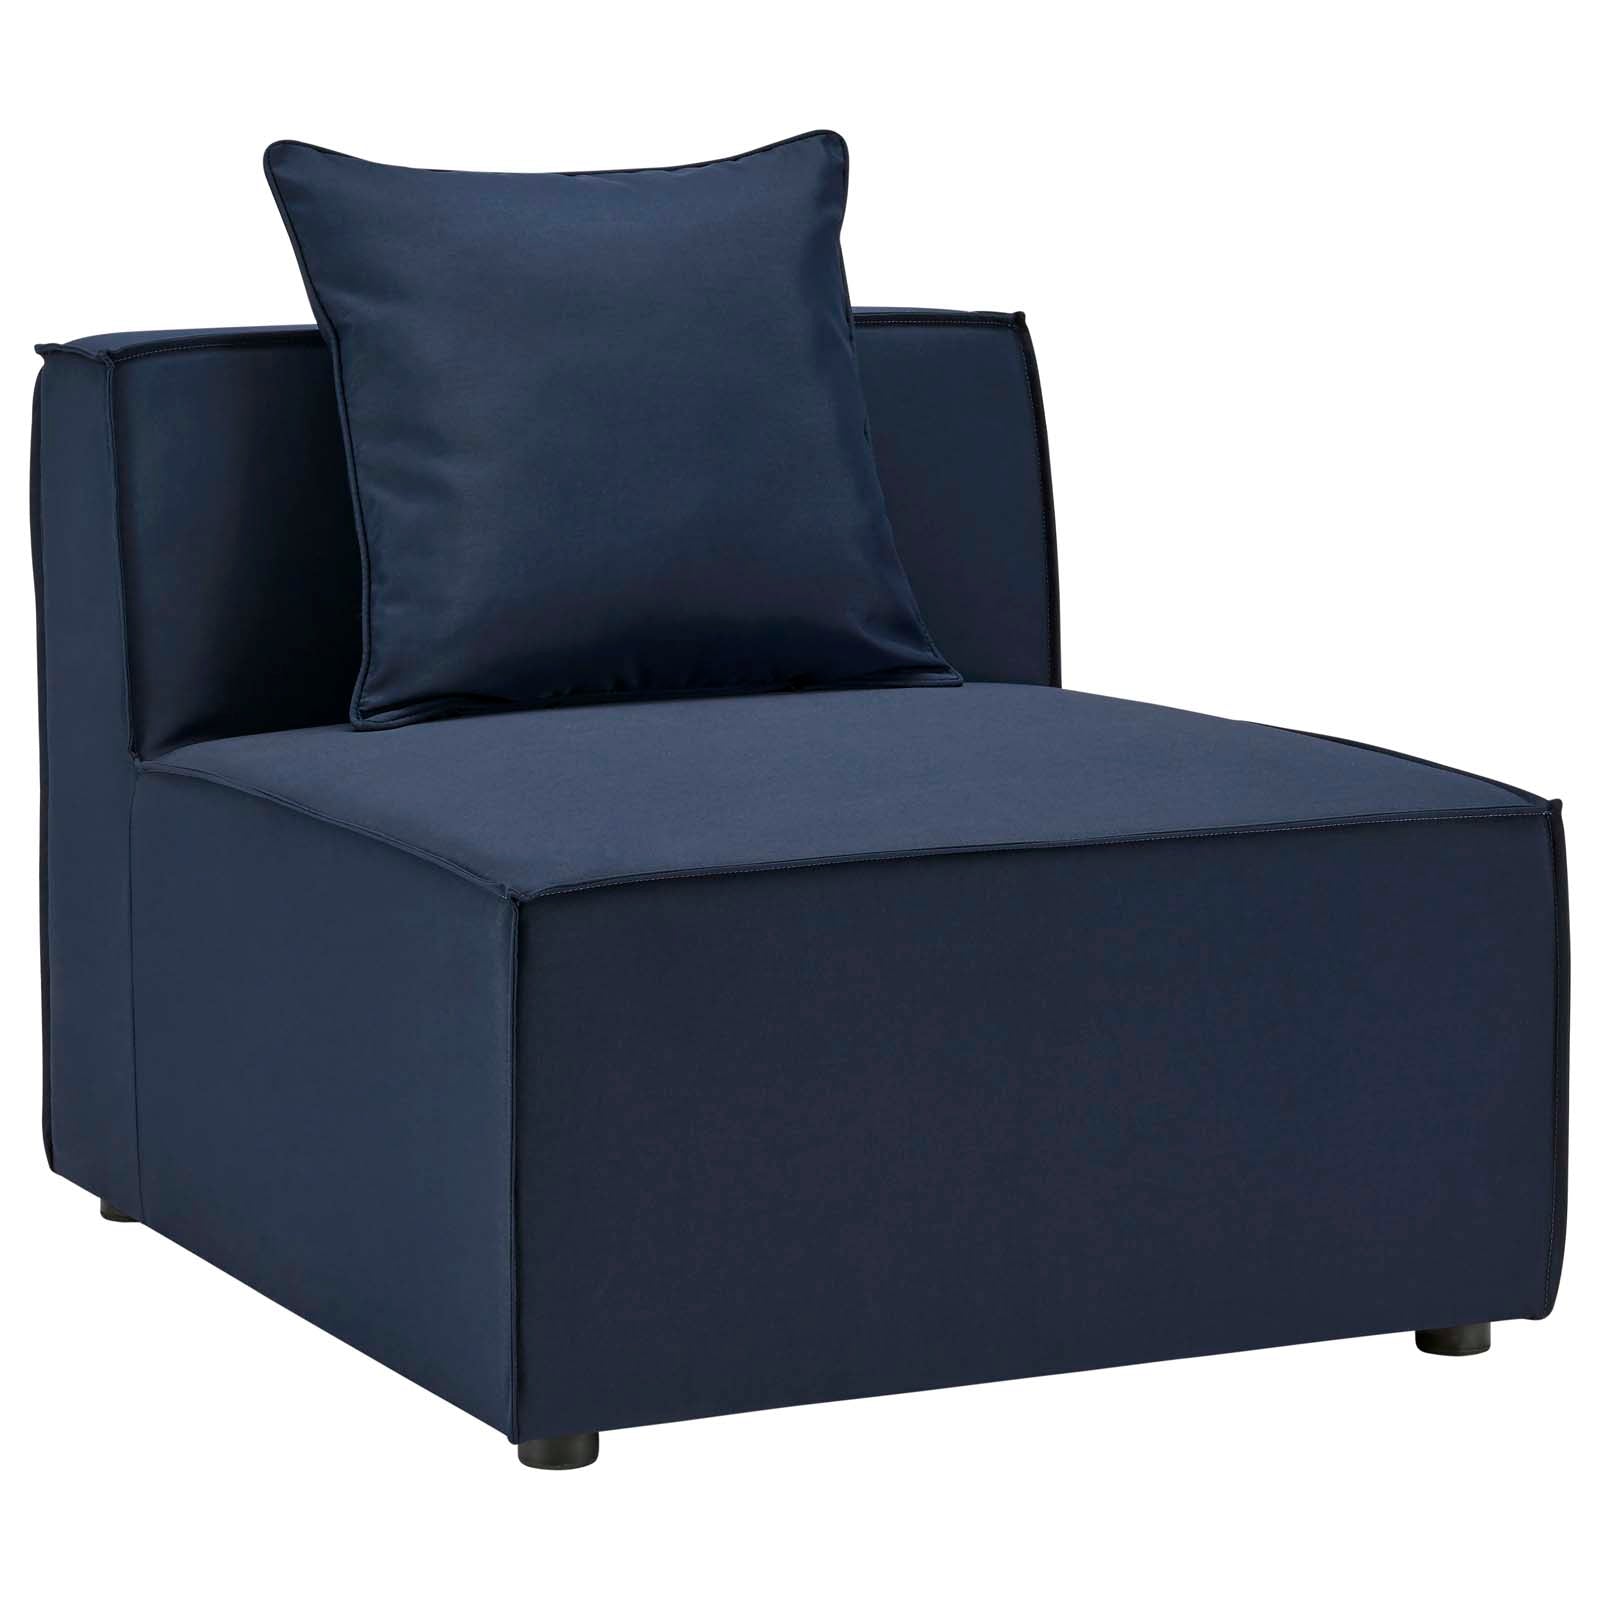 Modway Outdoor Sofas - Saybrook 138" Outdoor Patio Upholstered 6-Piece Sectional Sofa Navy